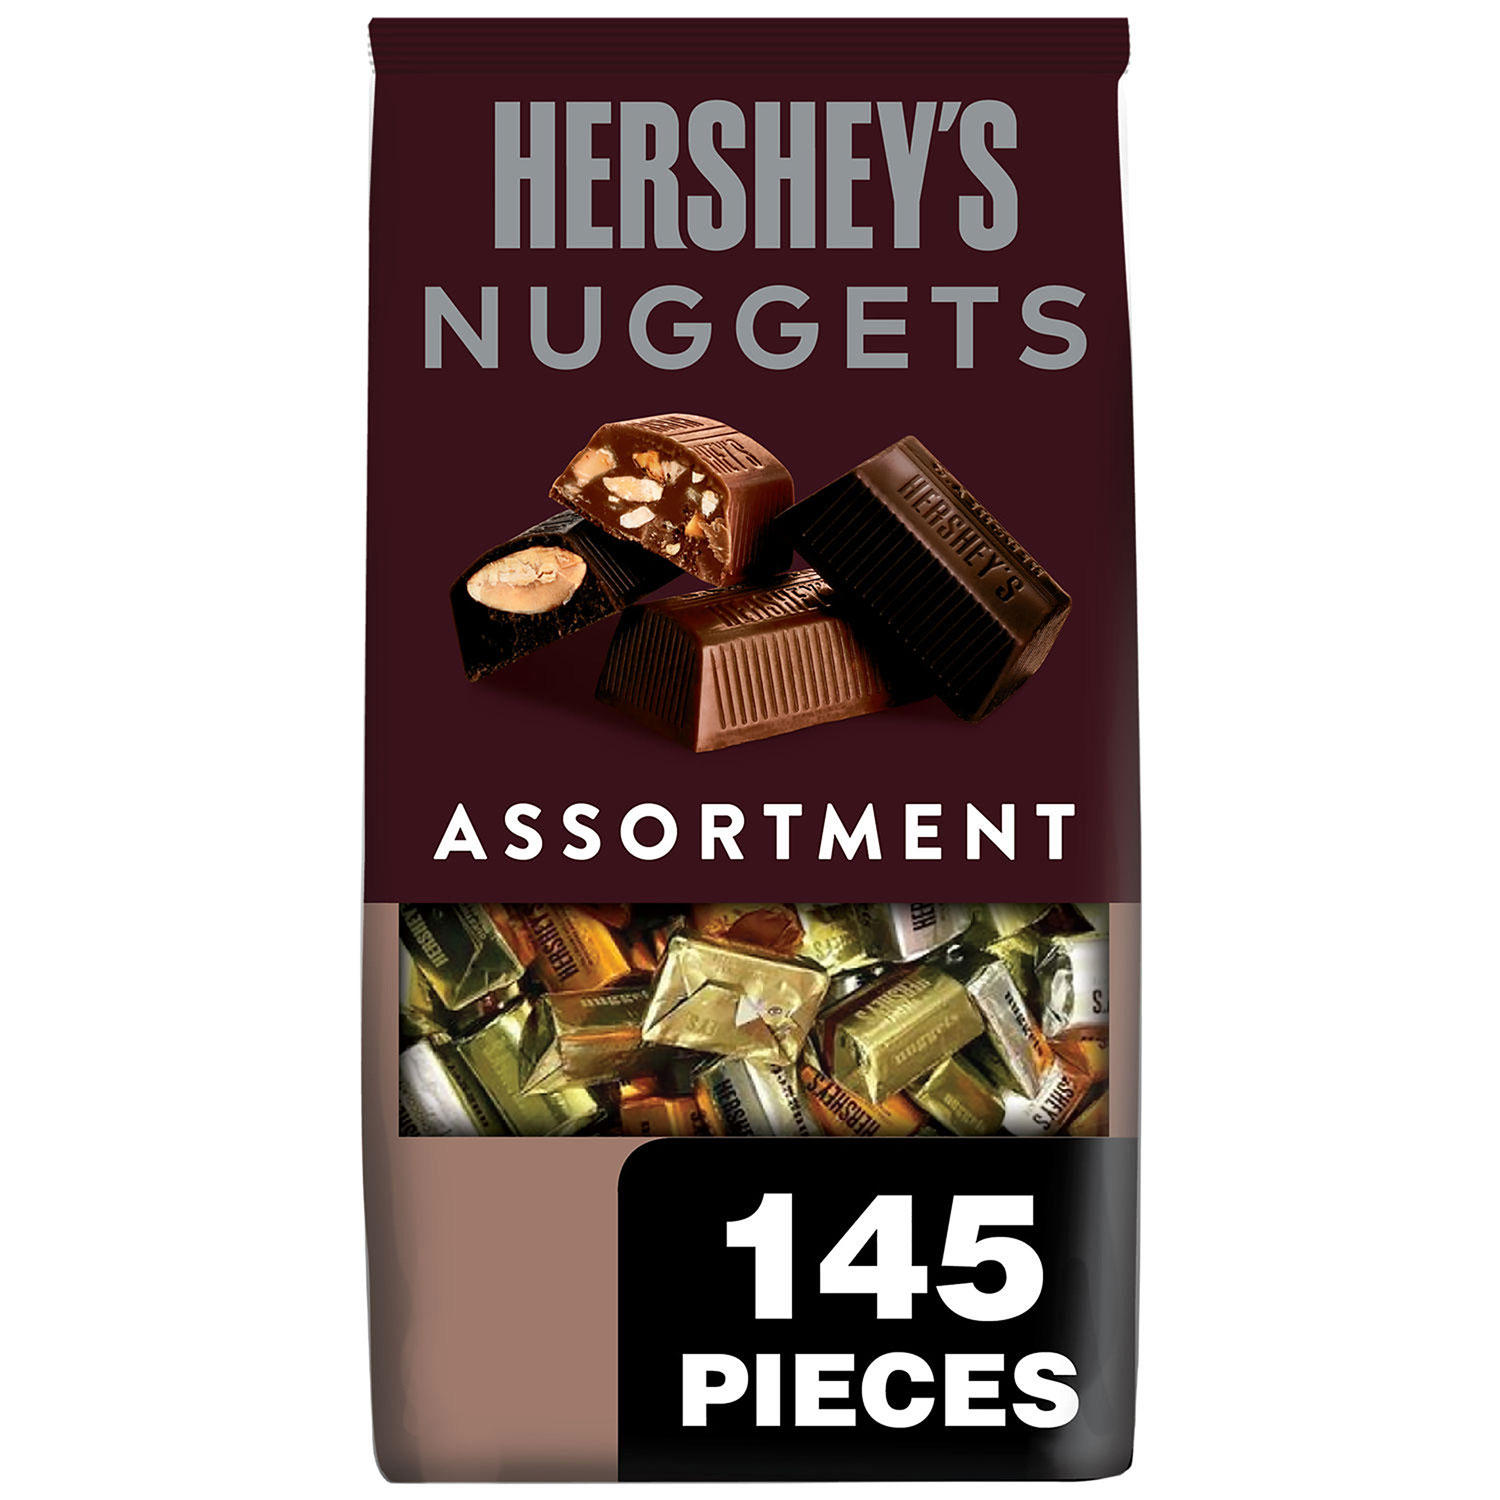 HERSHEY'S NUGGETS Assorted Chocolate Candy